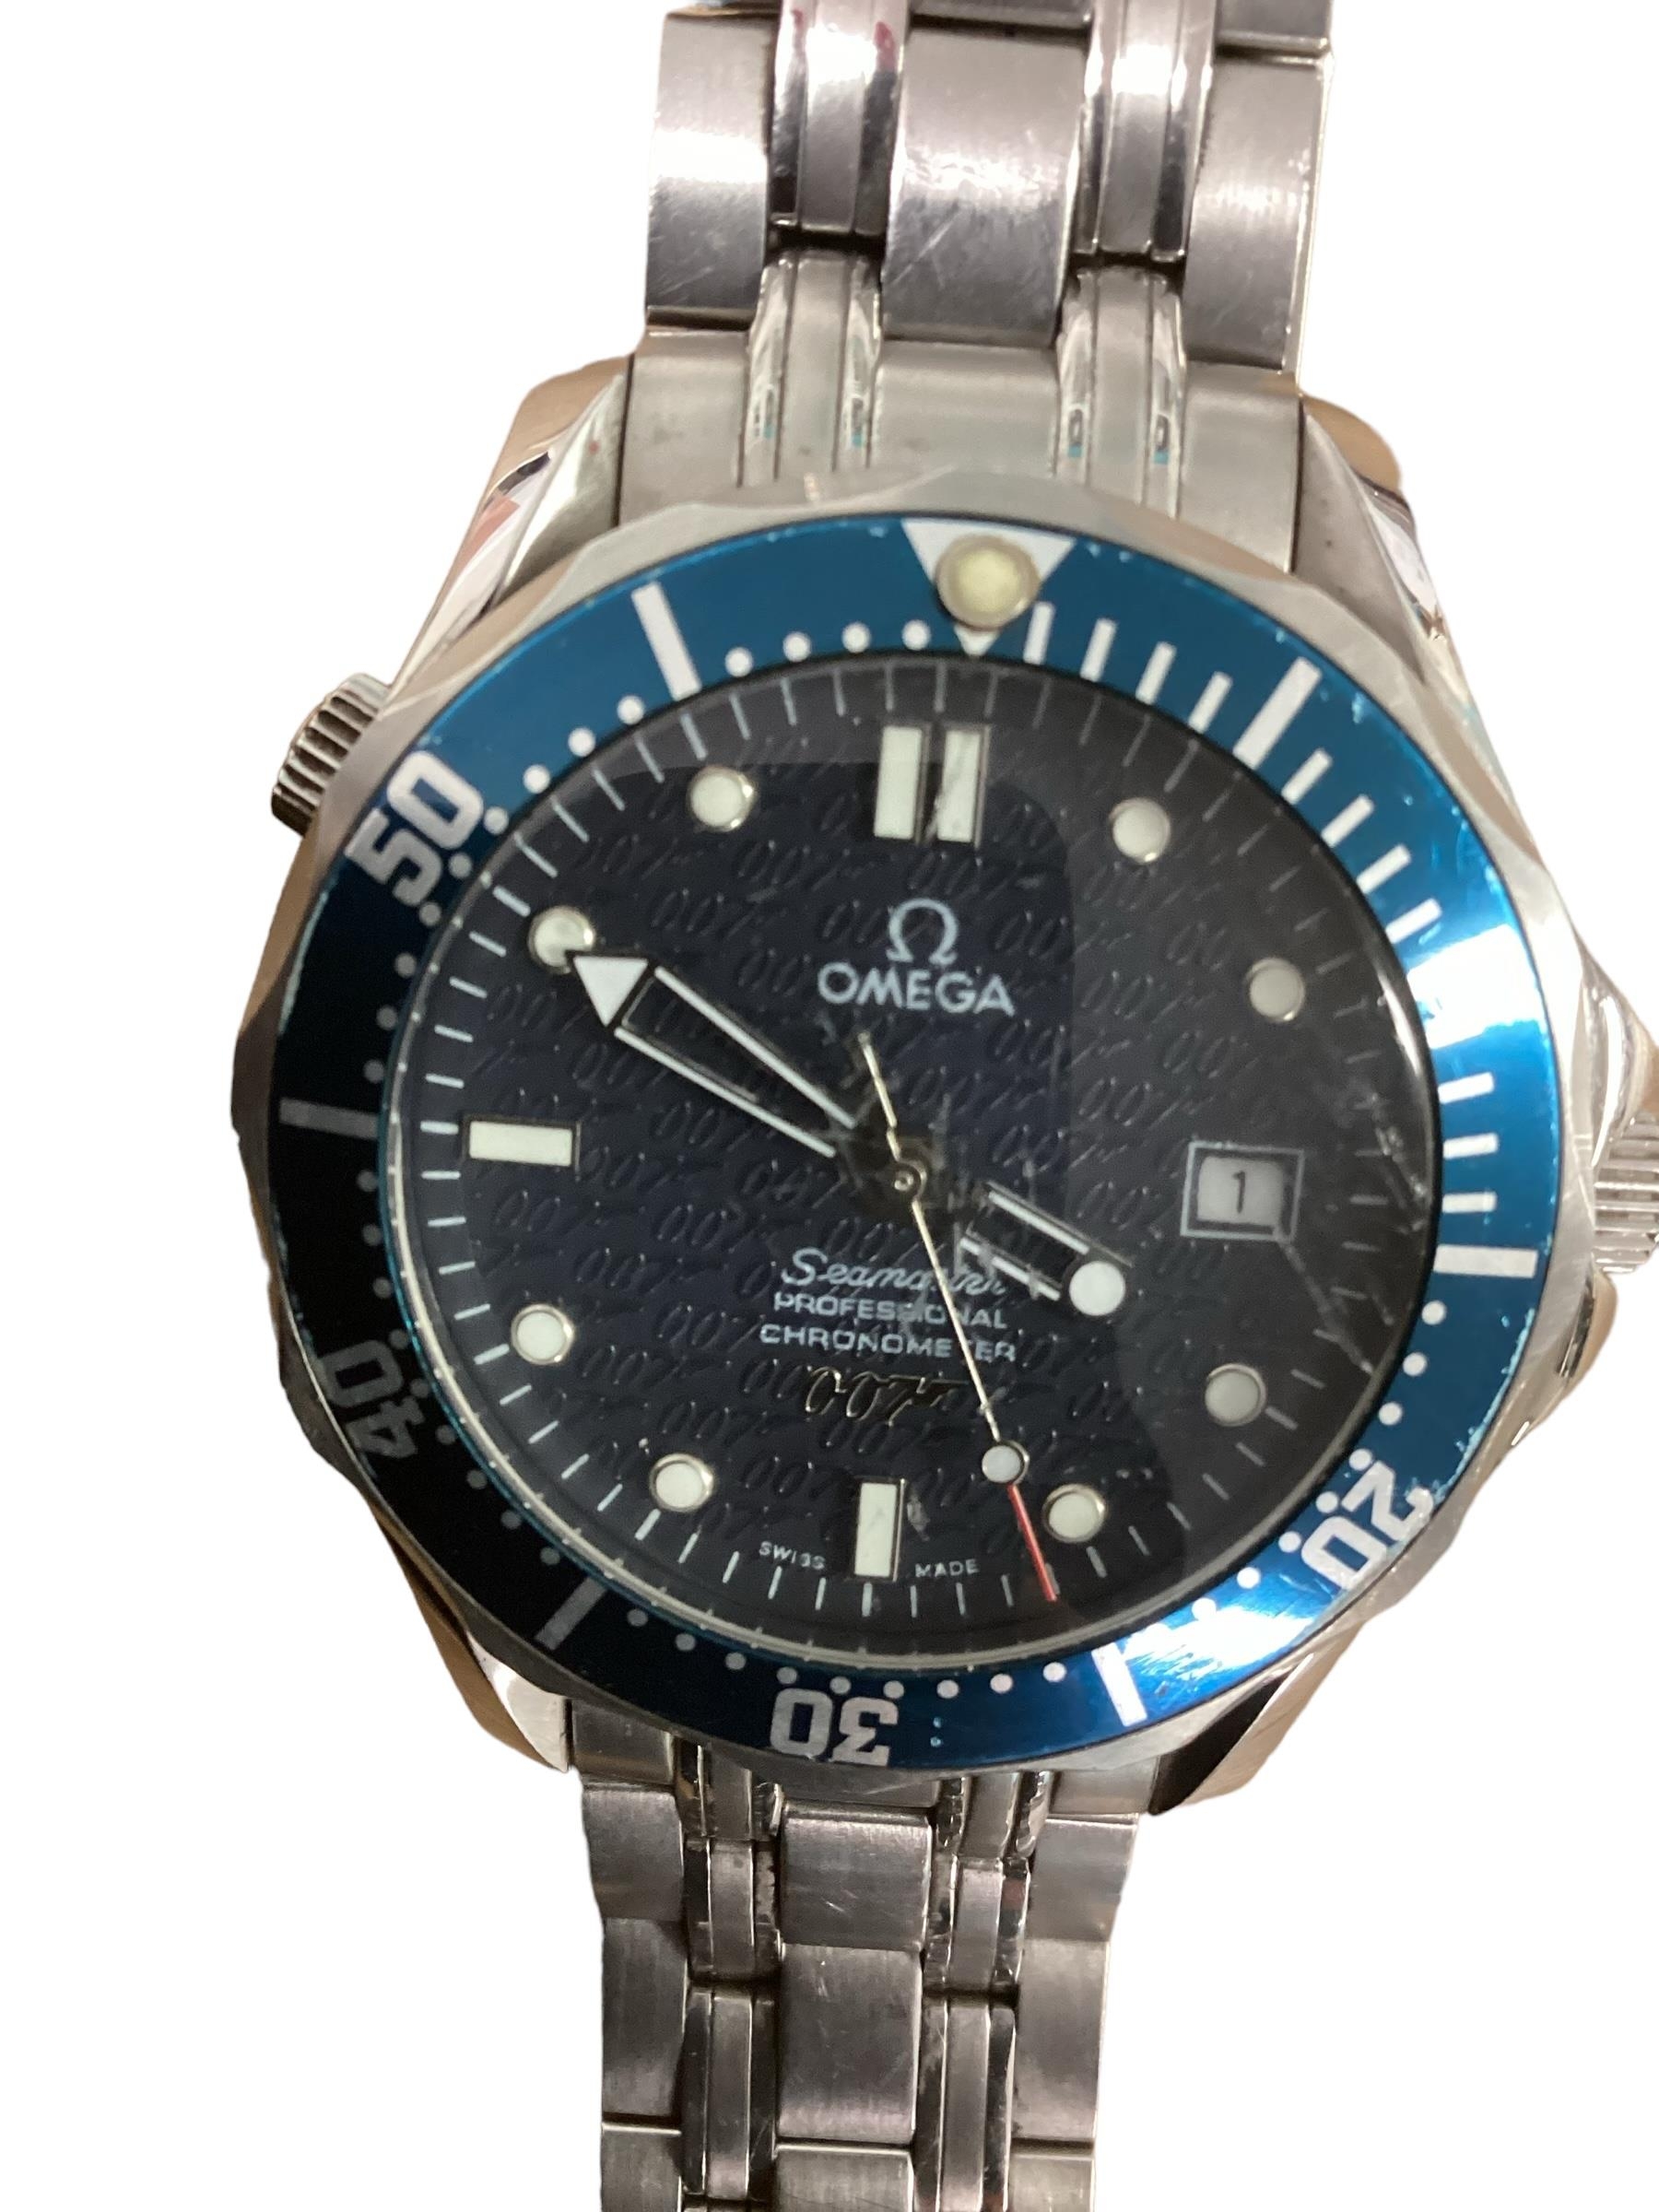 An Omega Seamaster, 007 Special Edition - Image 2 of 4